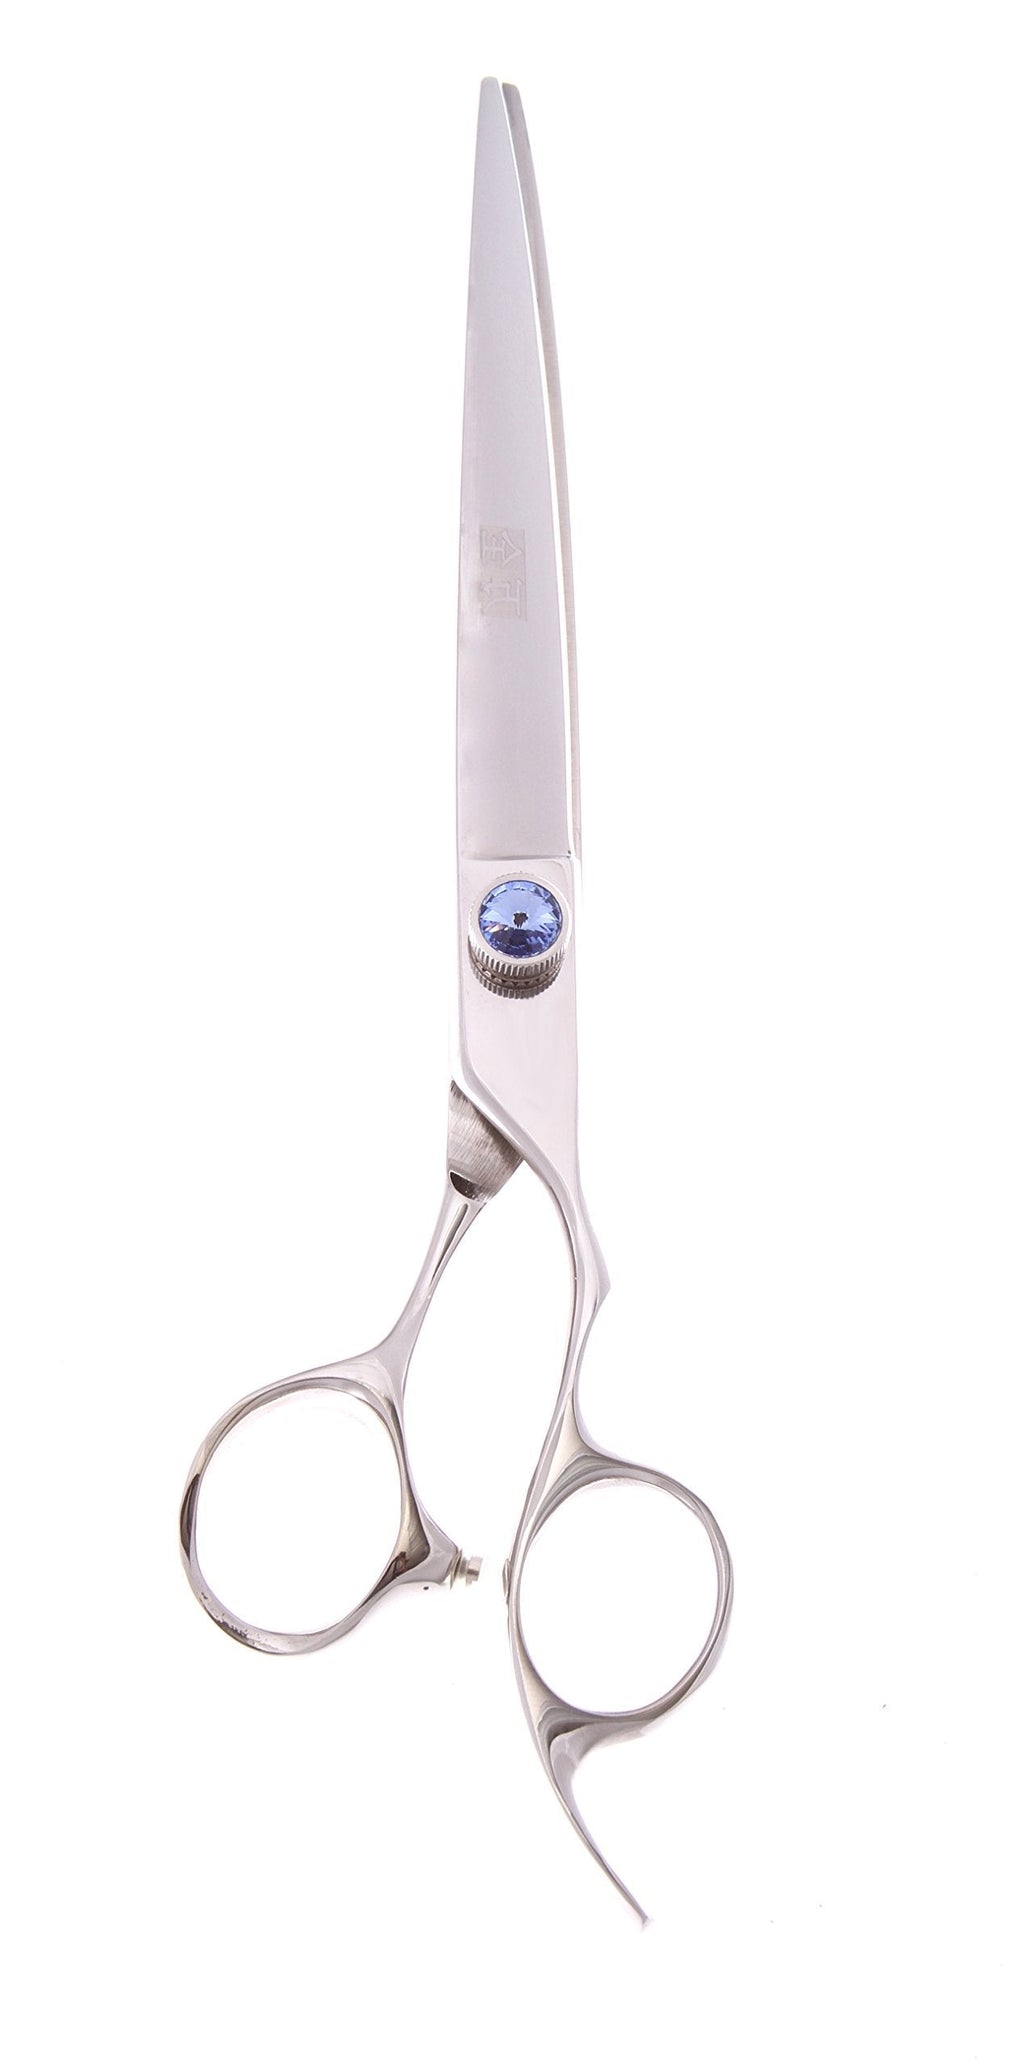 [Australia] - ShearsDirect Japanese 440C Silver Titanium Cutting Shears with Blue Gem Stone Tension and Anatomic Thumb, 9.0-Inch 